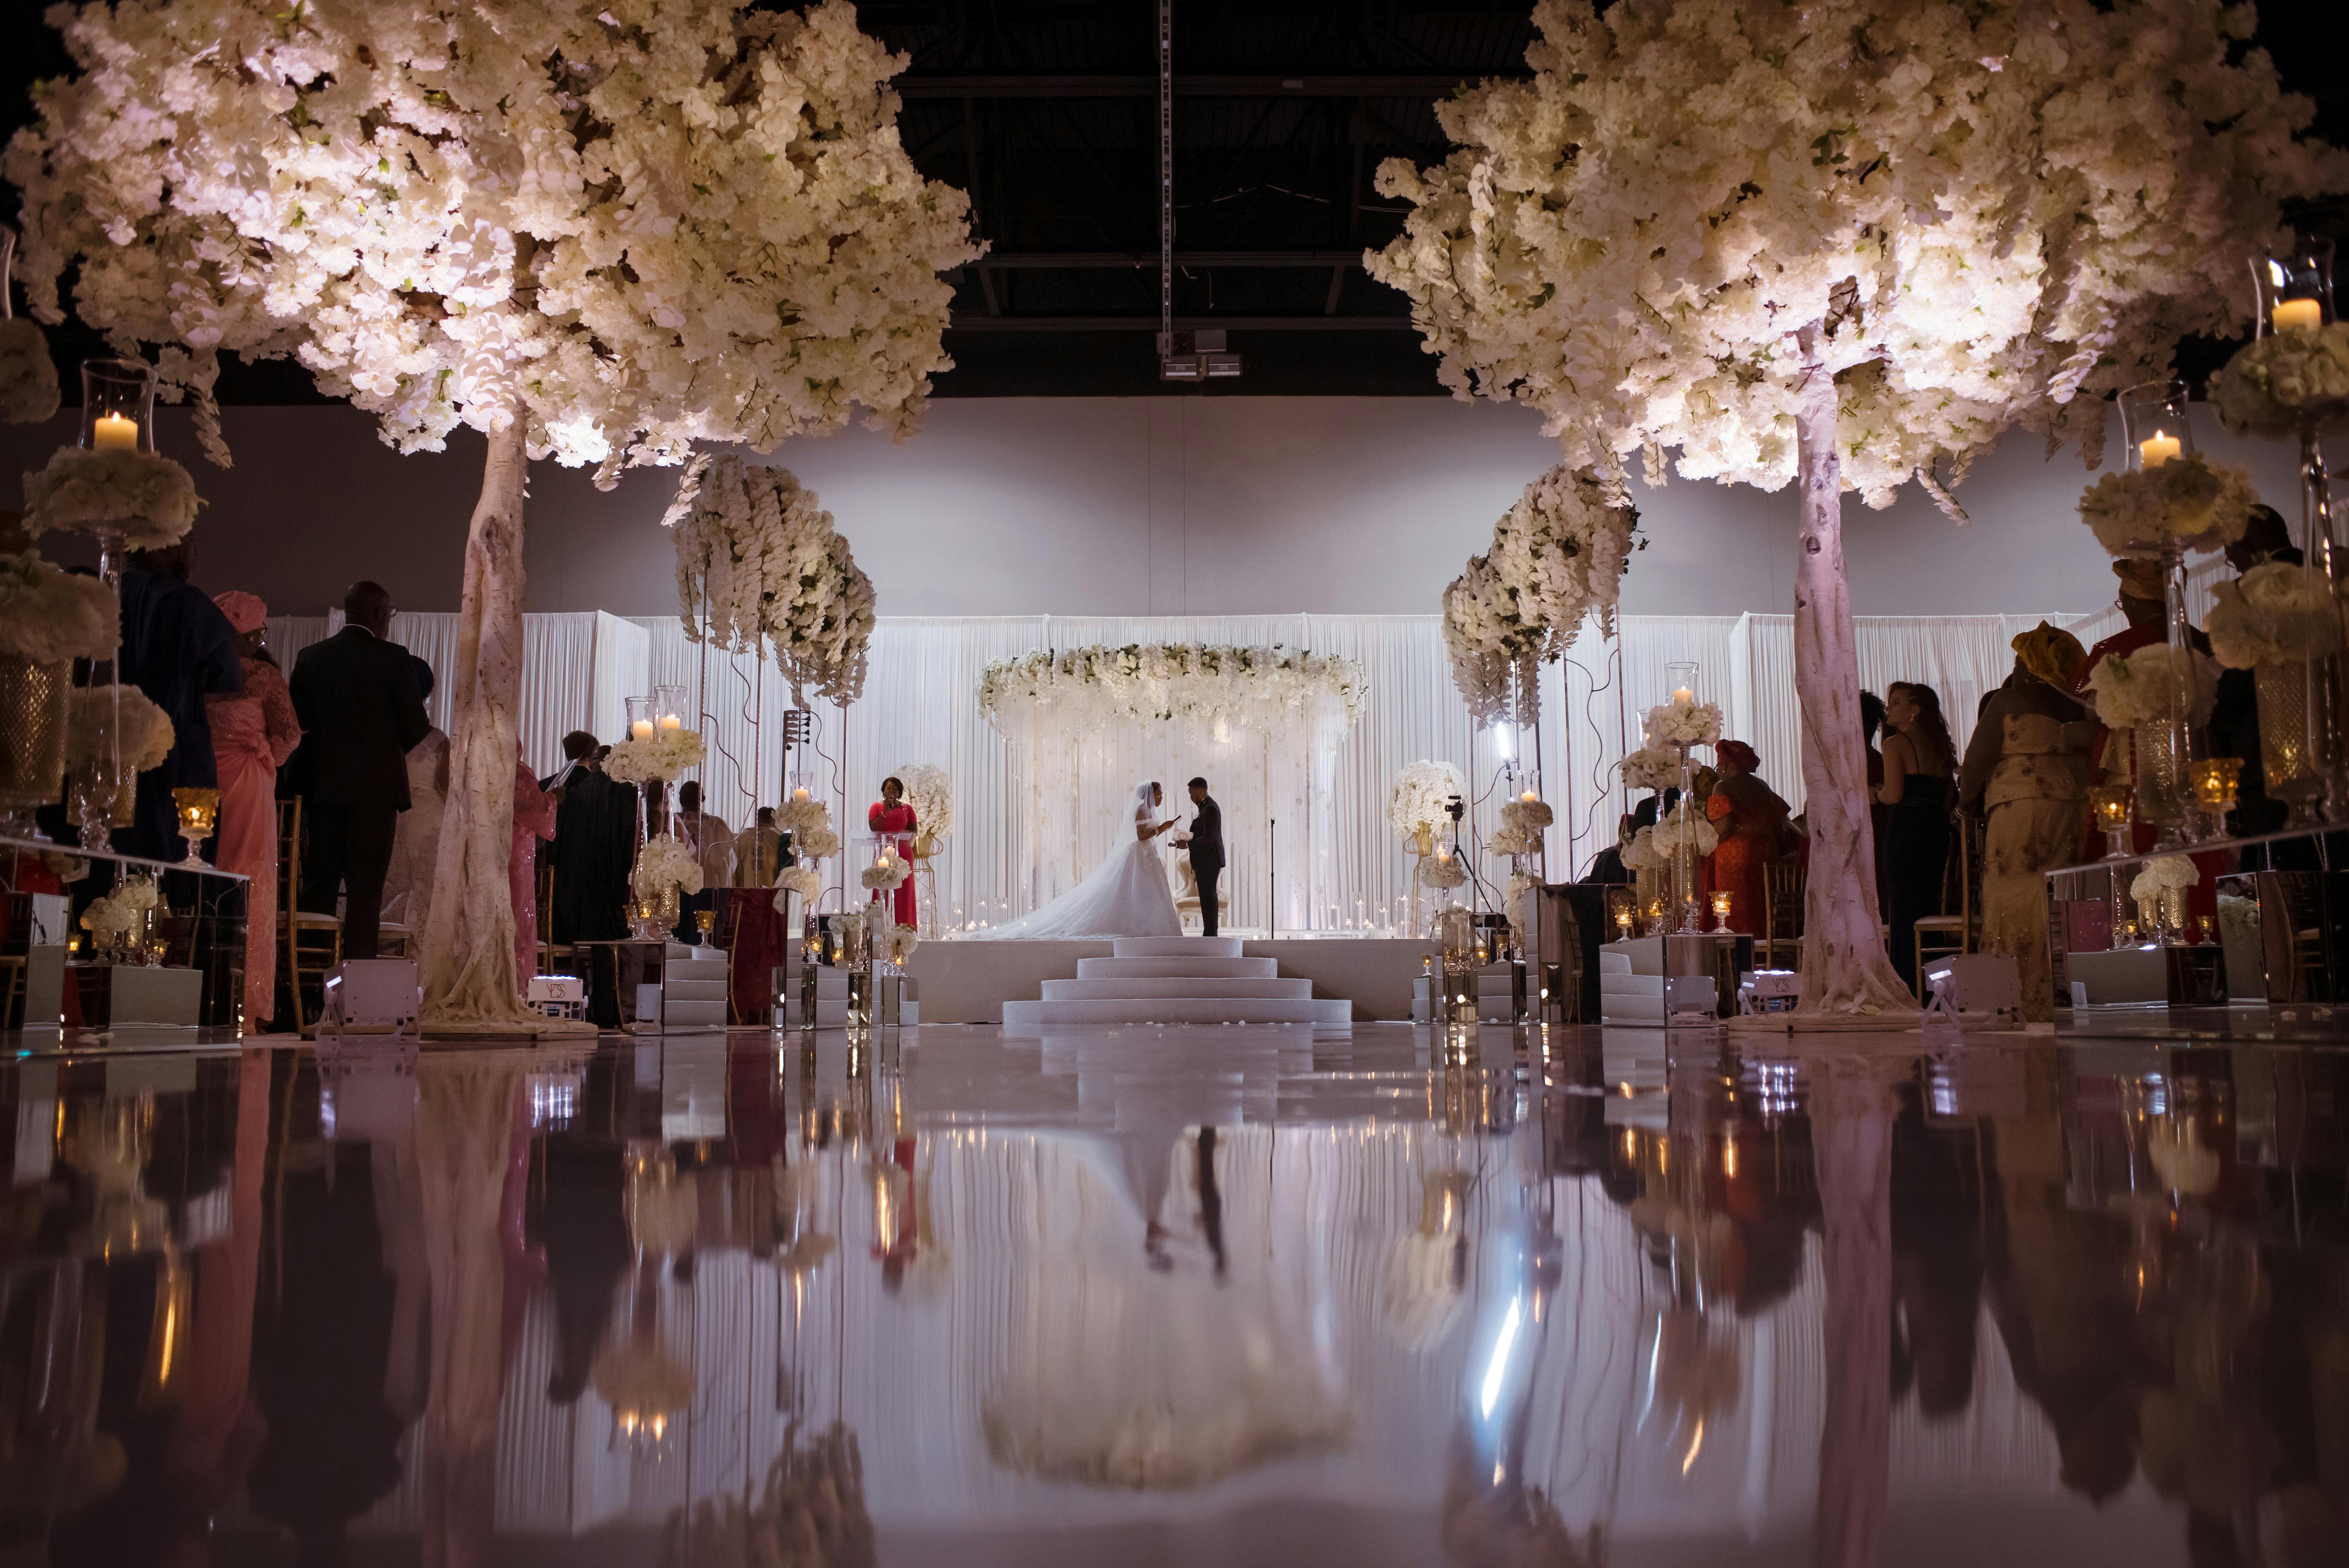 Glamorous all-white wedding with white flower trees and a mirrored aisle | PartySlate